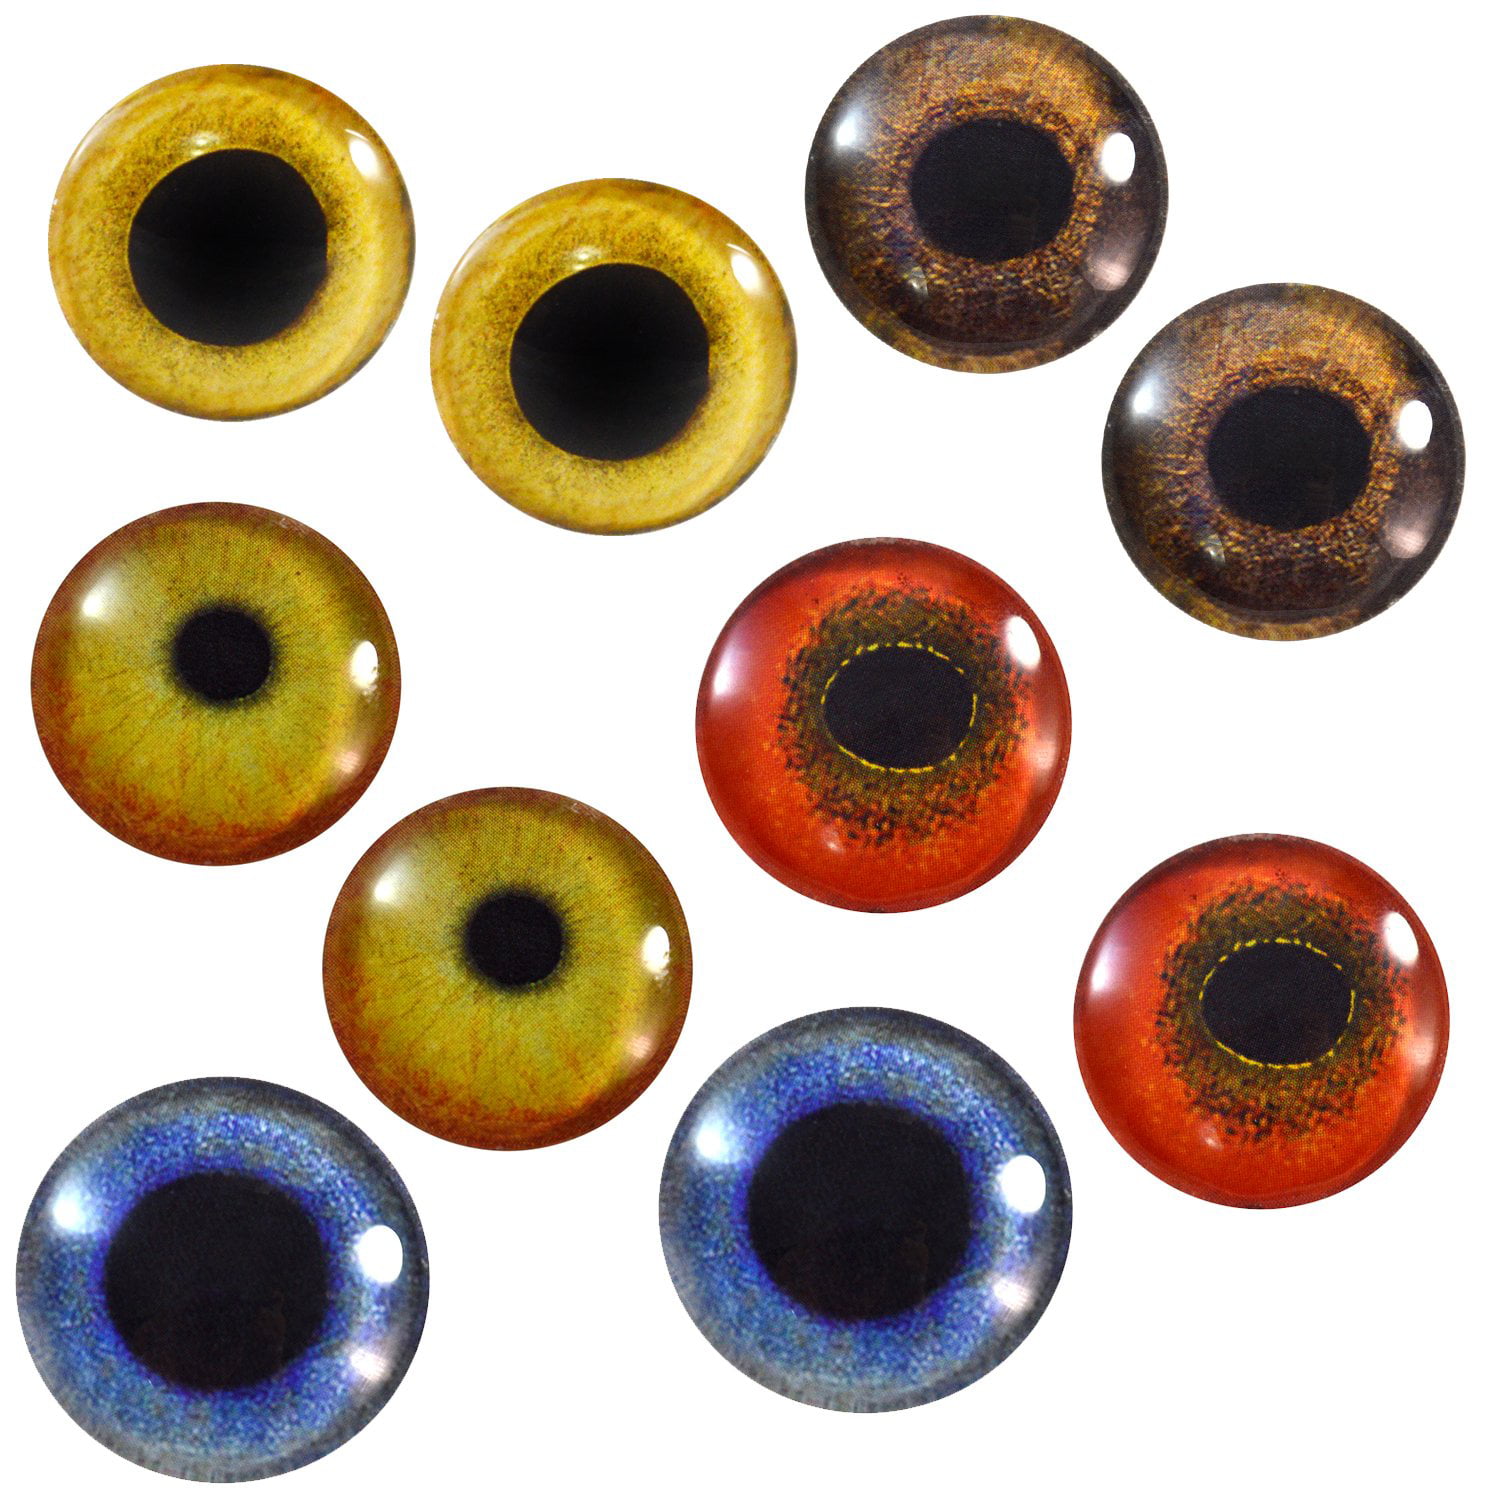 Pair of 40mm Blue Dog Animal Glass Eyes Cabochons Set Taxidermy Jewelry Making 